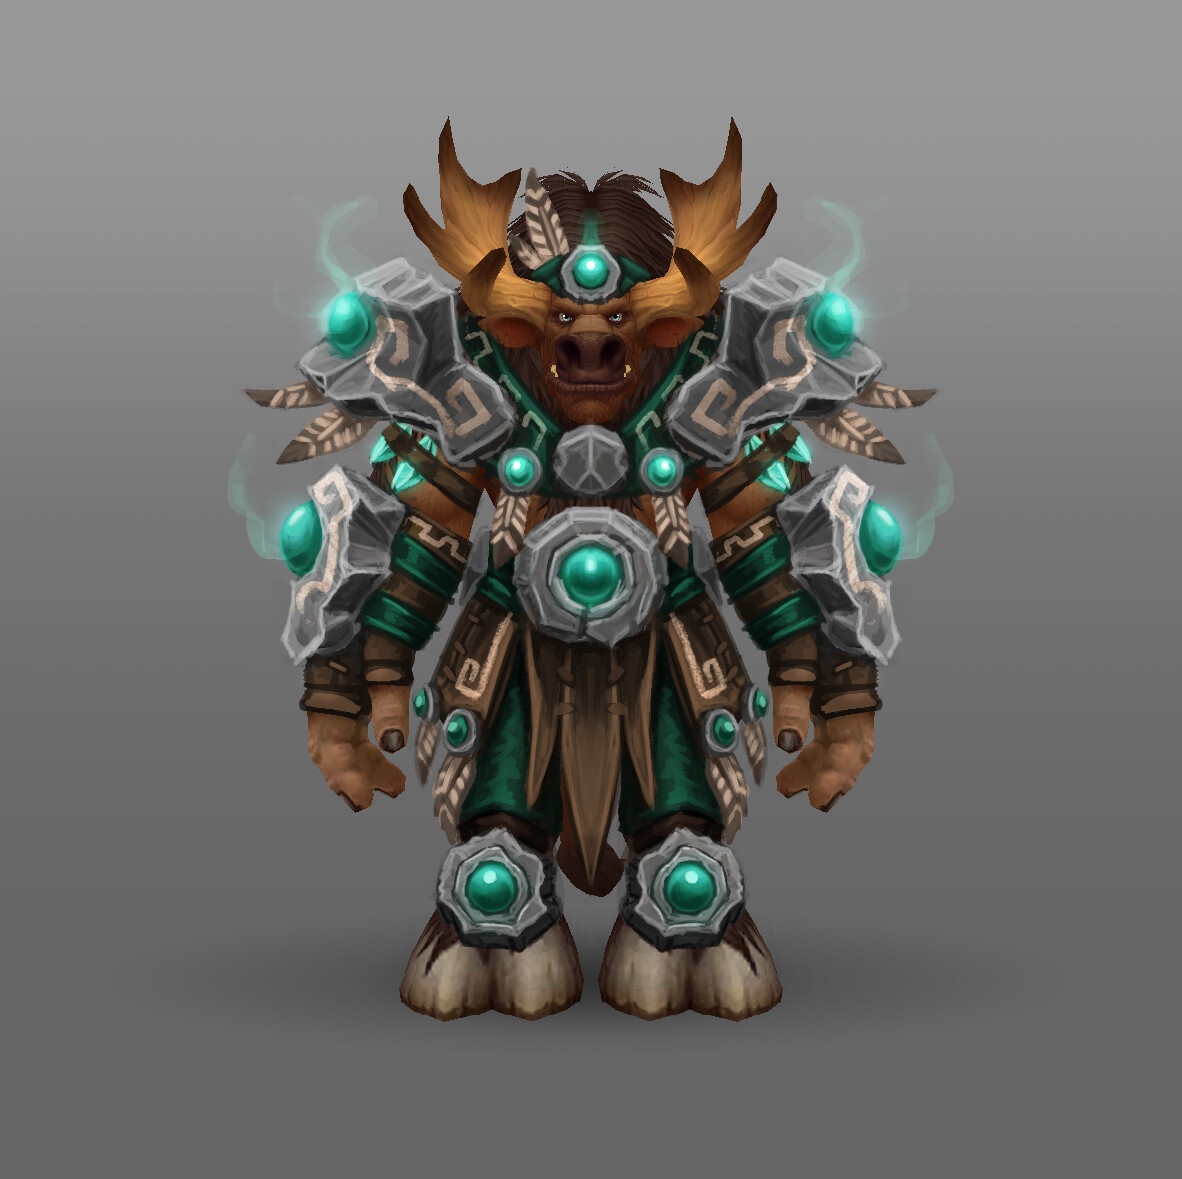 Monk

Based on the Drogbar. As the Stonedark Drogbar played their part in uniting the Highmontain tauren, I wanted to give them a little nod through one of the sets.